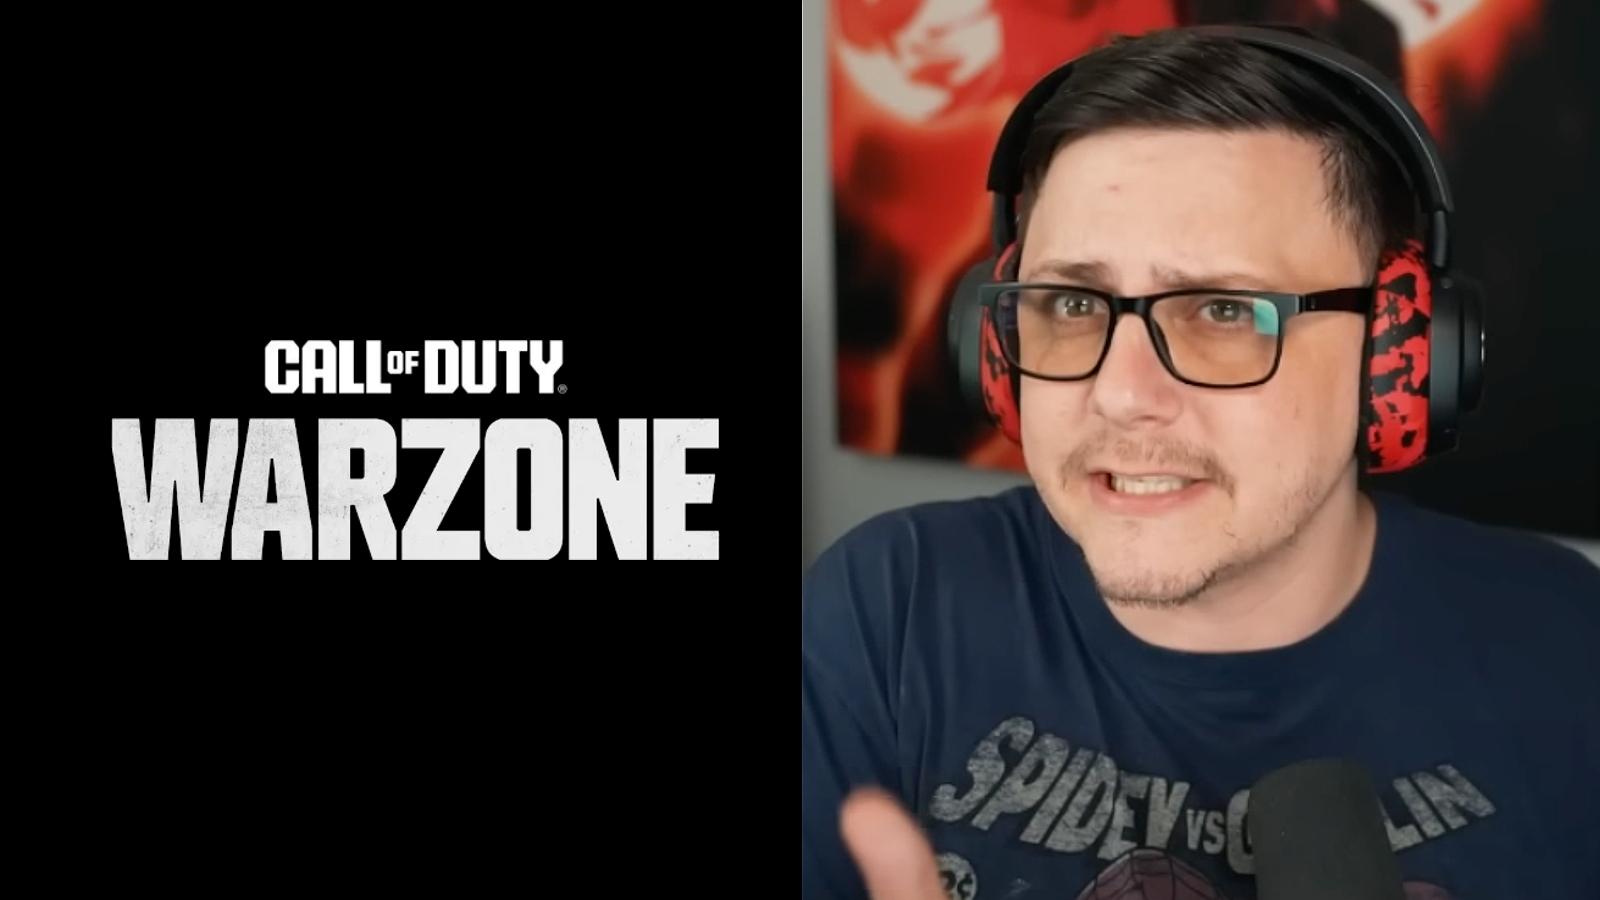 JGOD in YouTube video with new Warzone logo